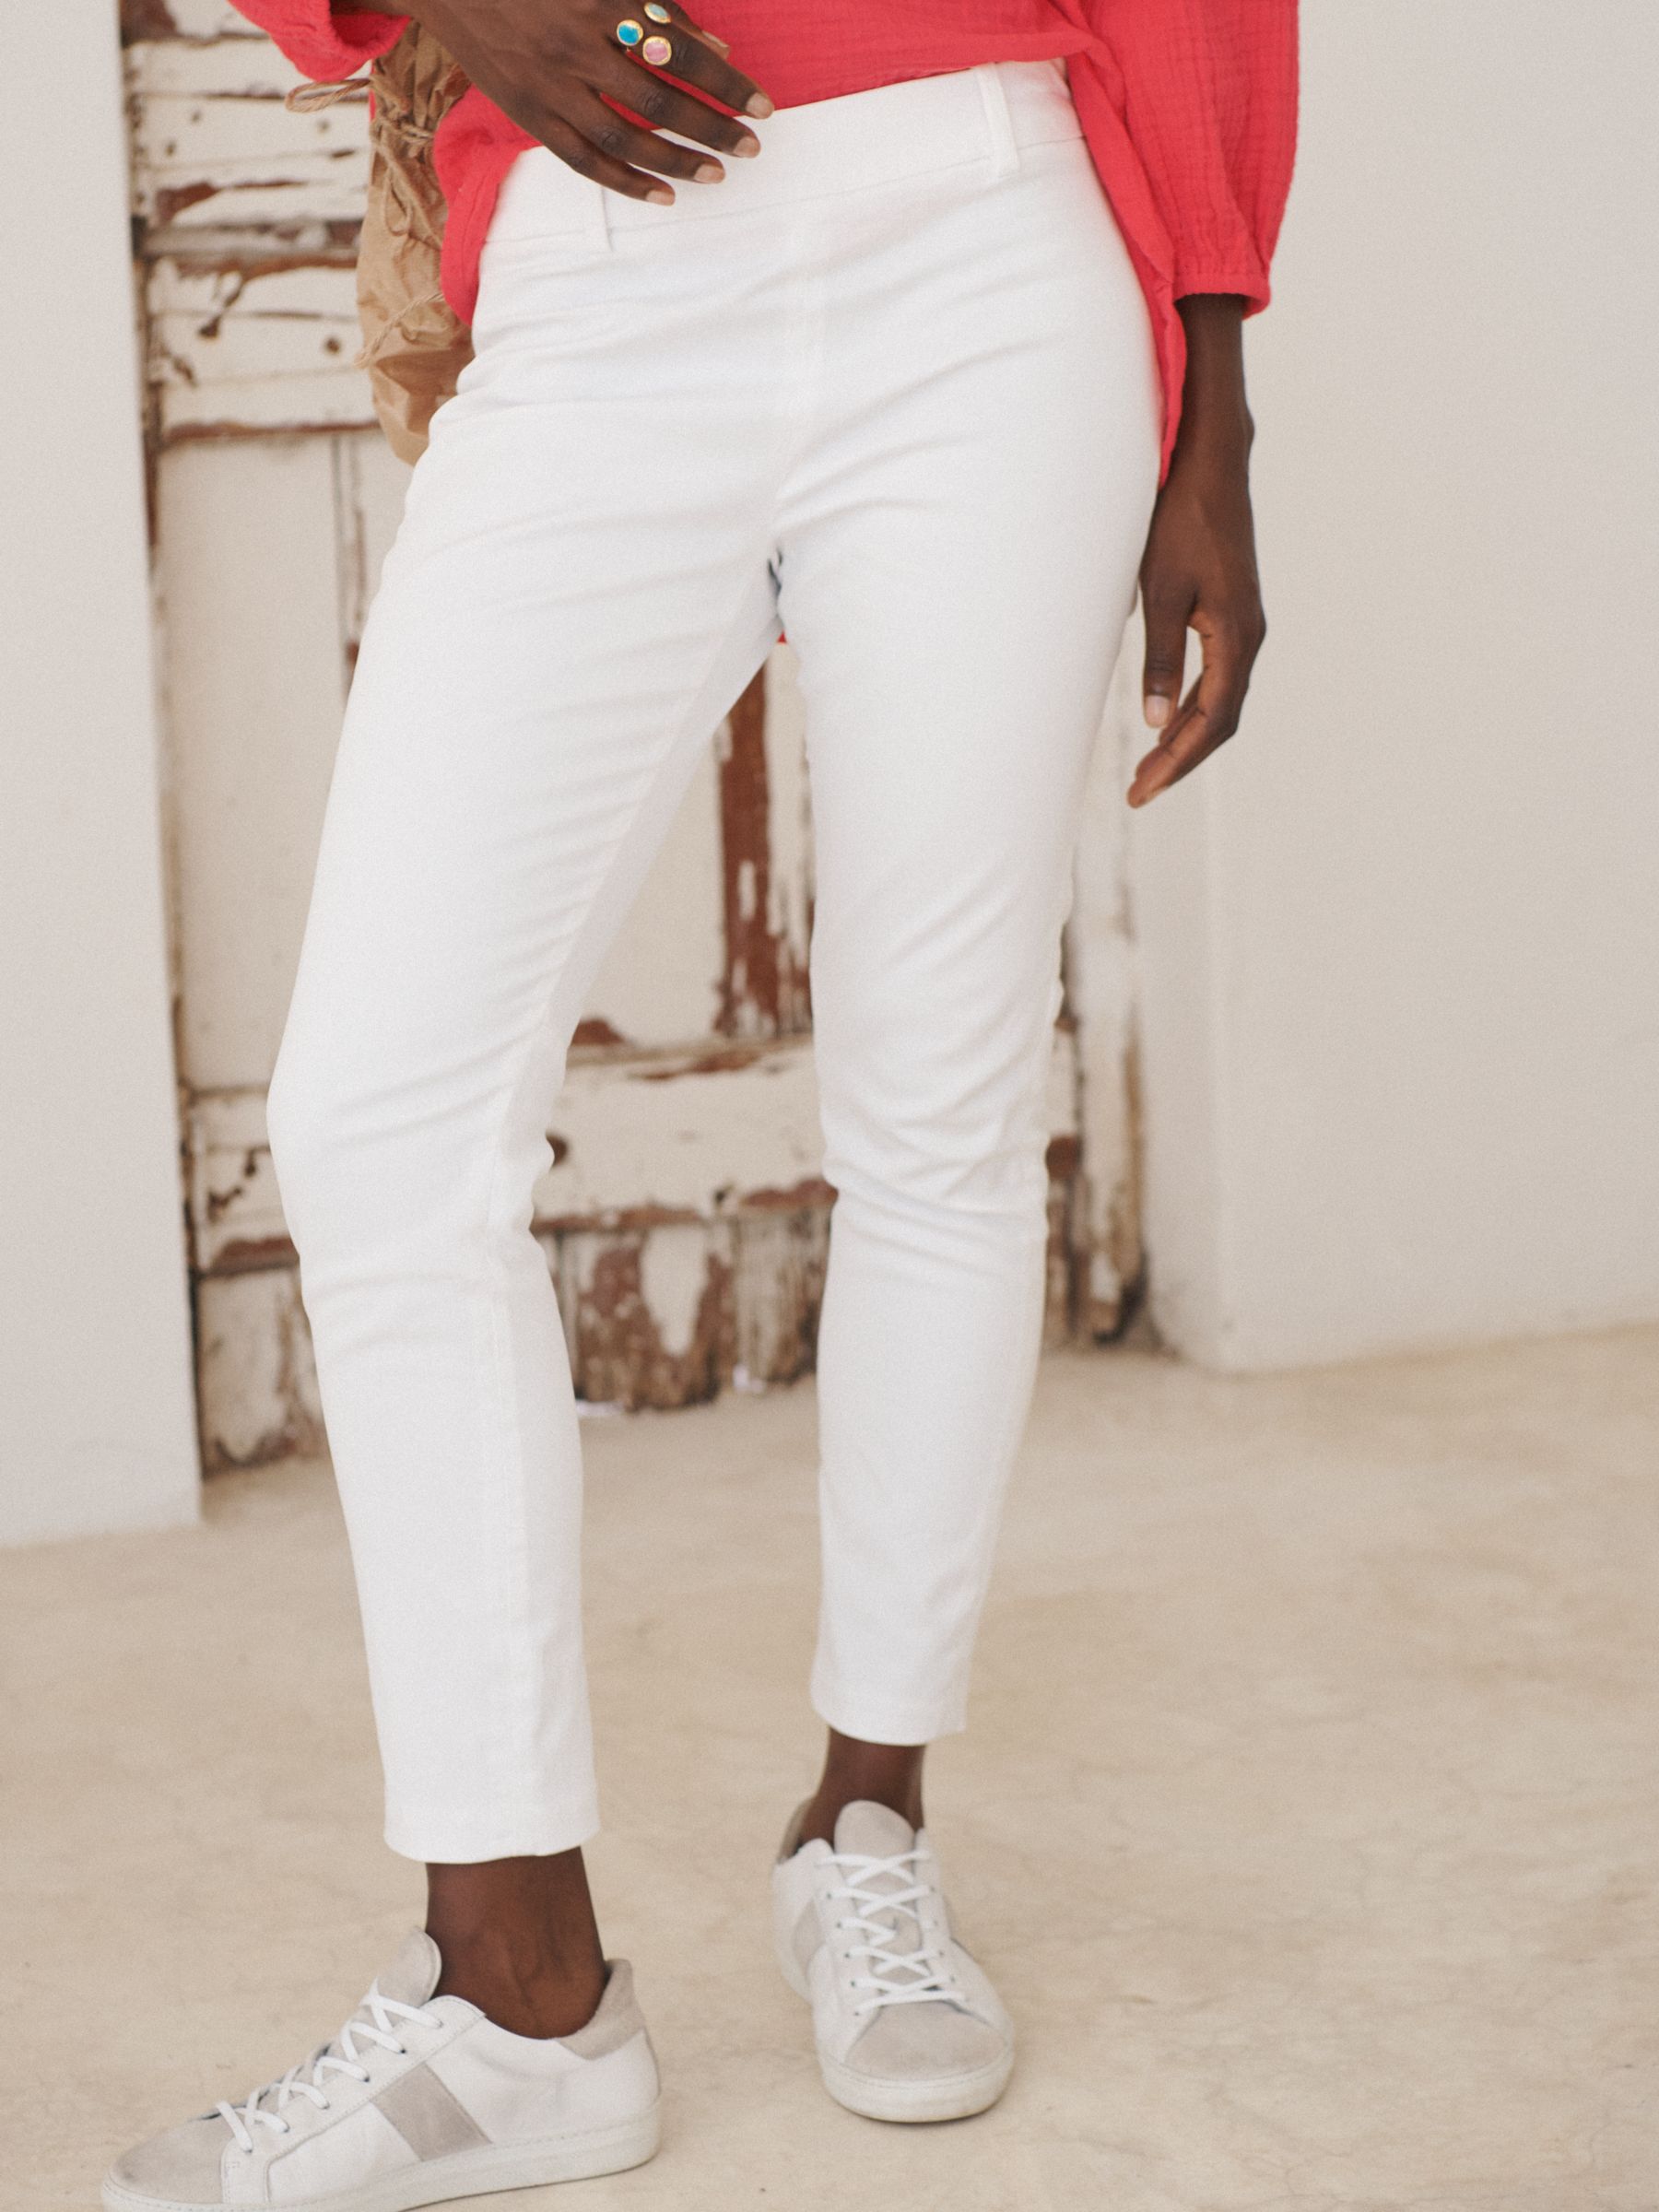 Buy NRBY Colette Cotton Blend Trousers, White Online at johnlewis.com